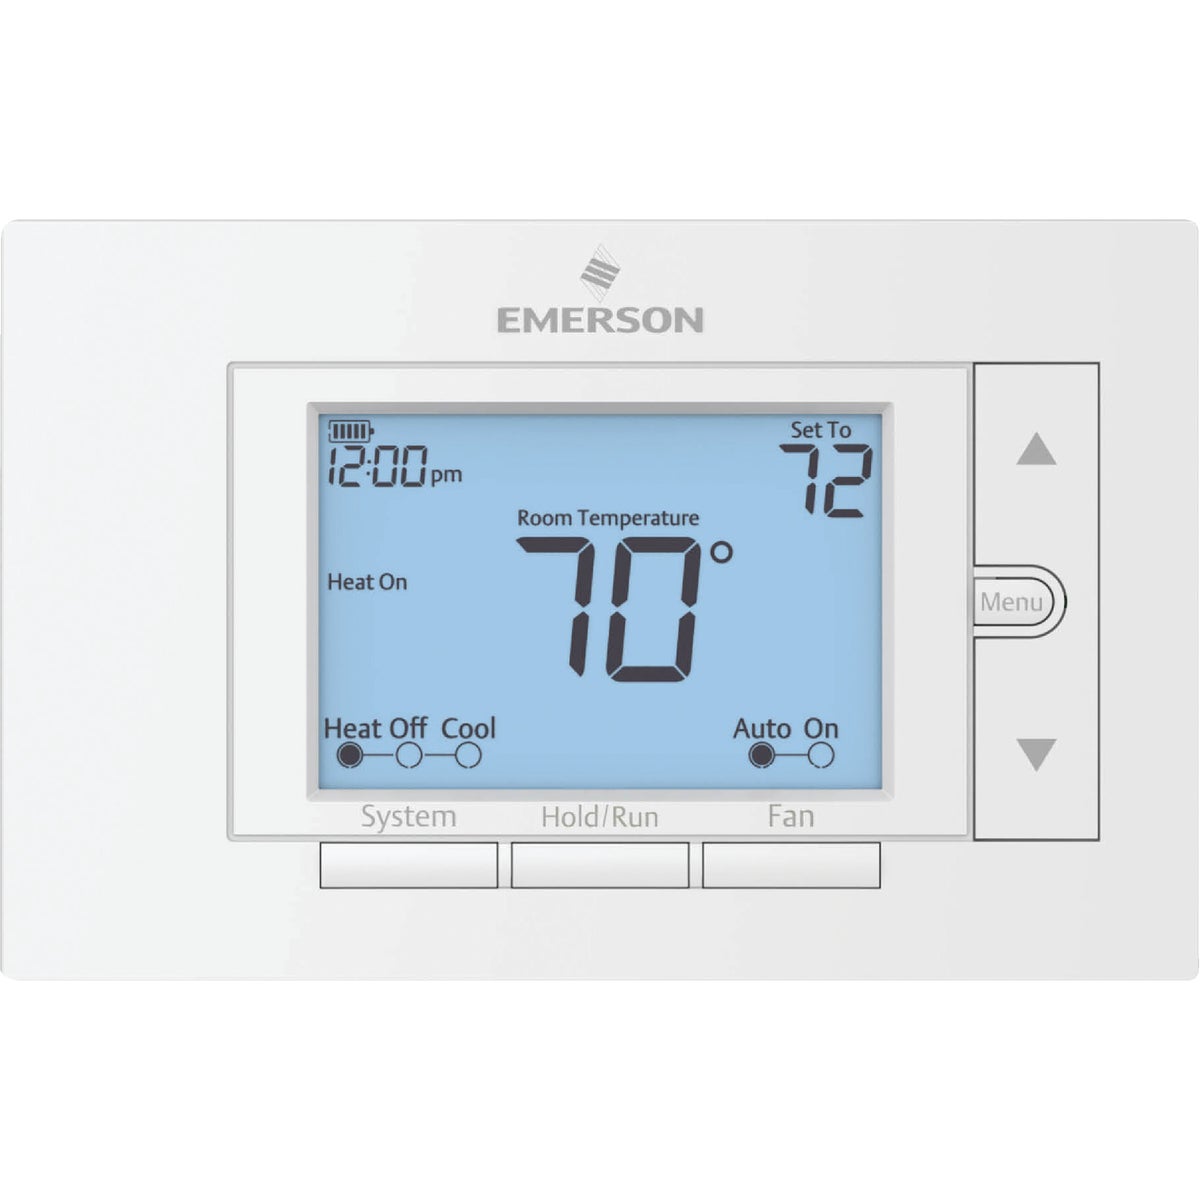 Item 400776, Universal 7-day programmable thermostat allows you to set a different 